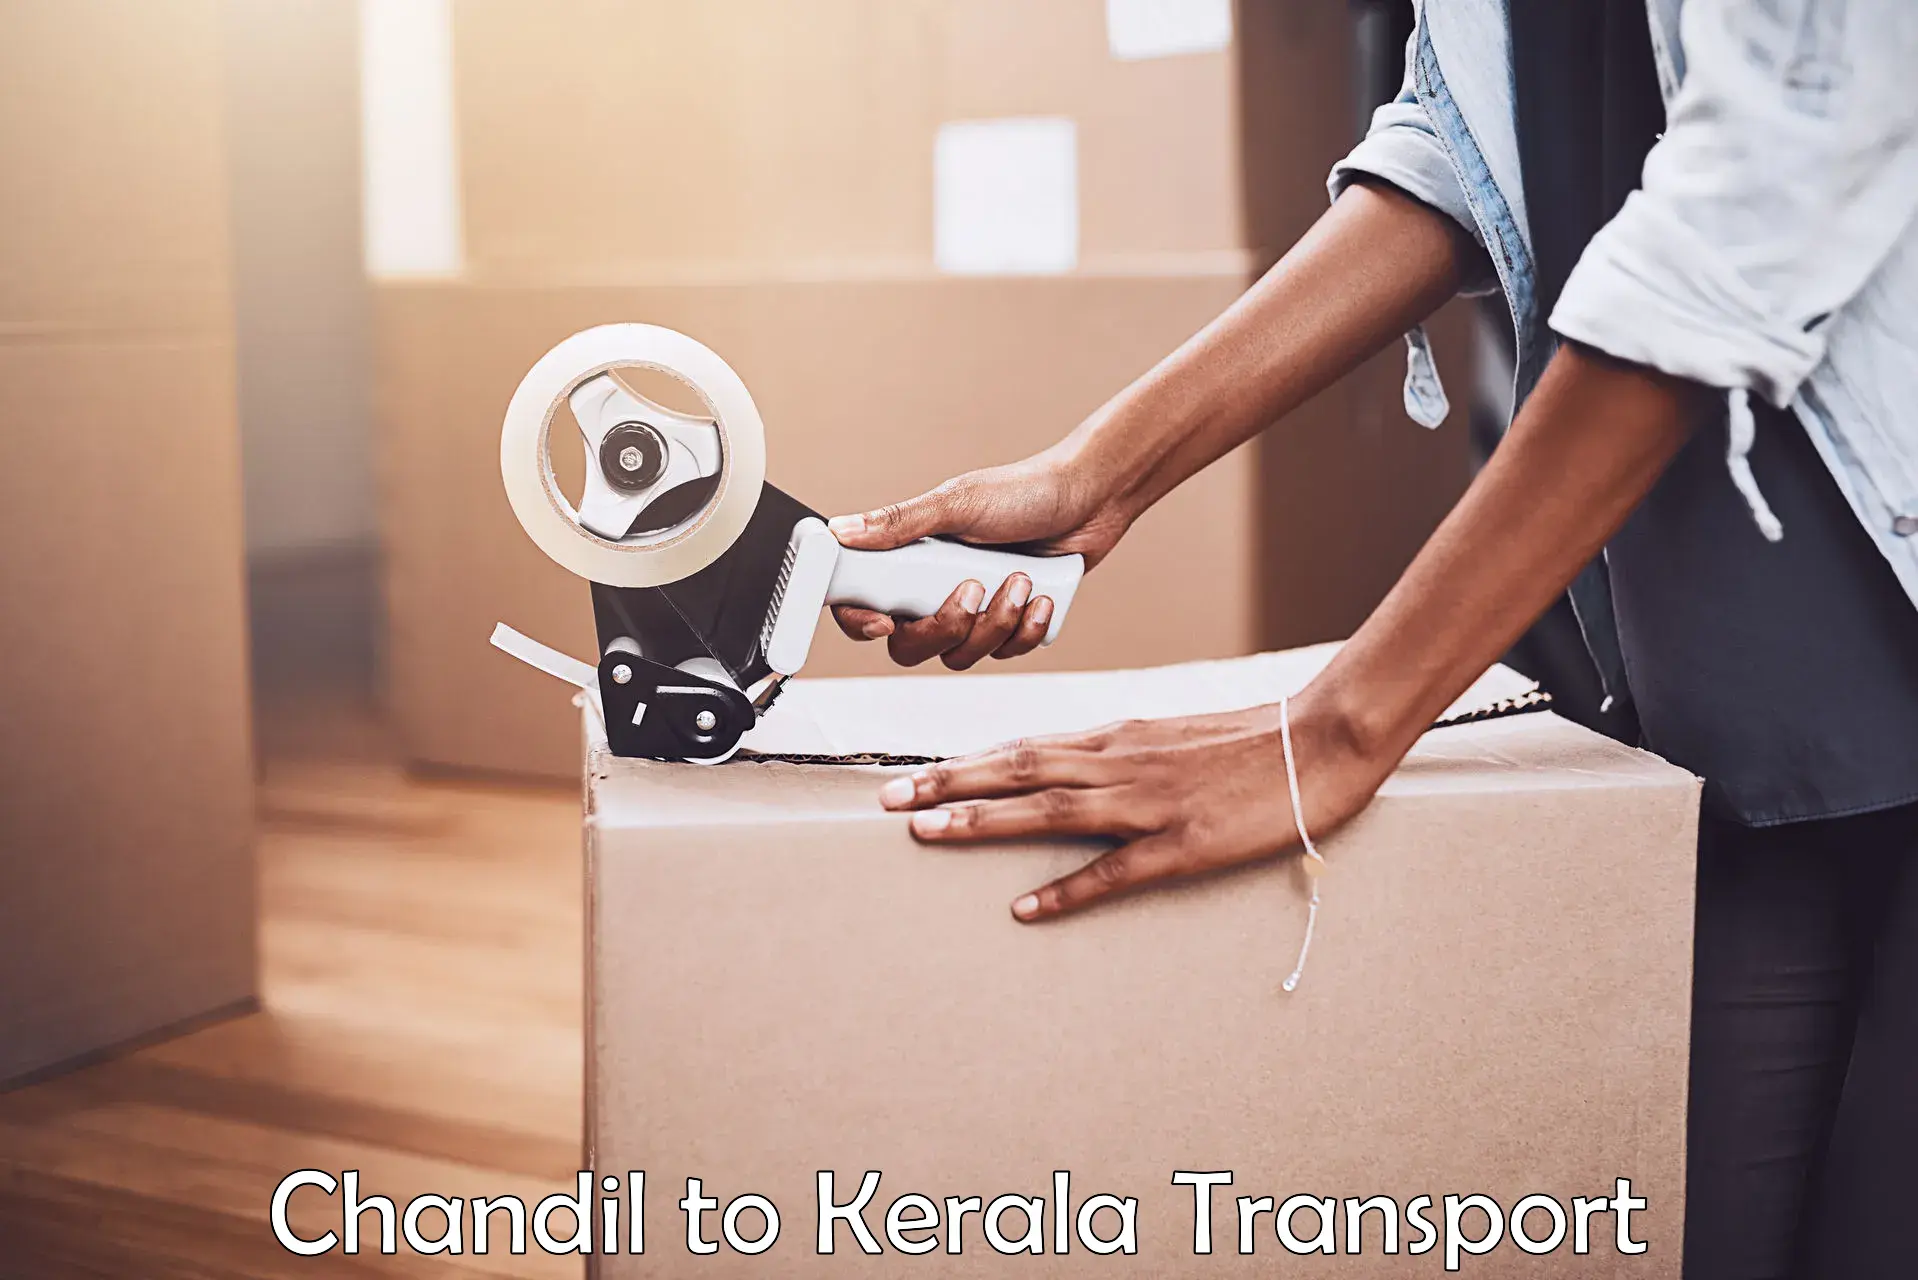 Two wheeler transport services Chandil to Cochin University of Science and Technology